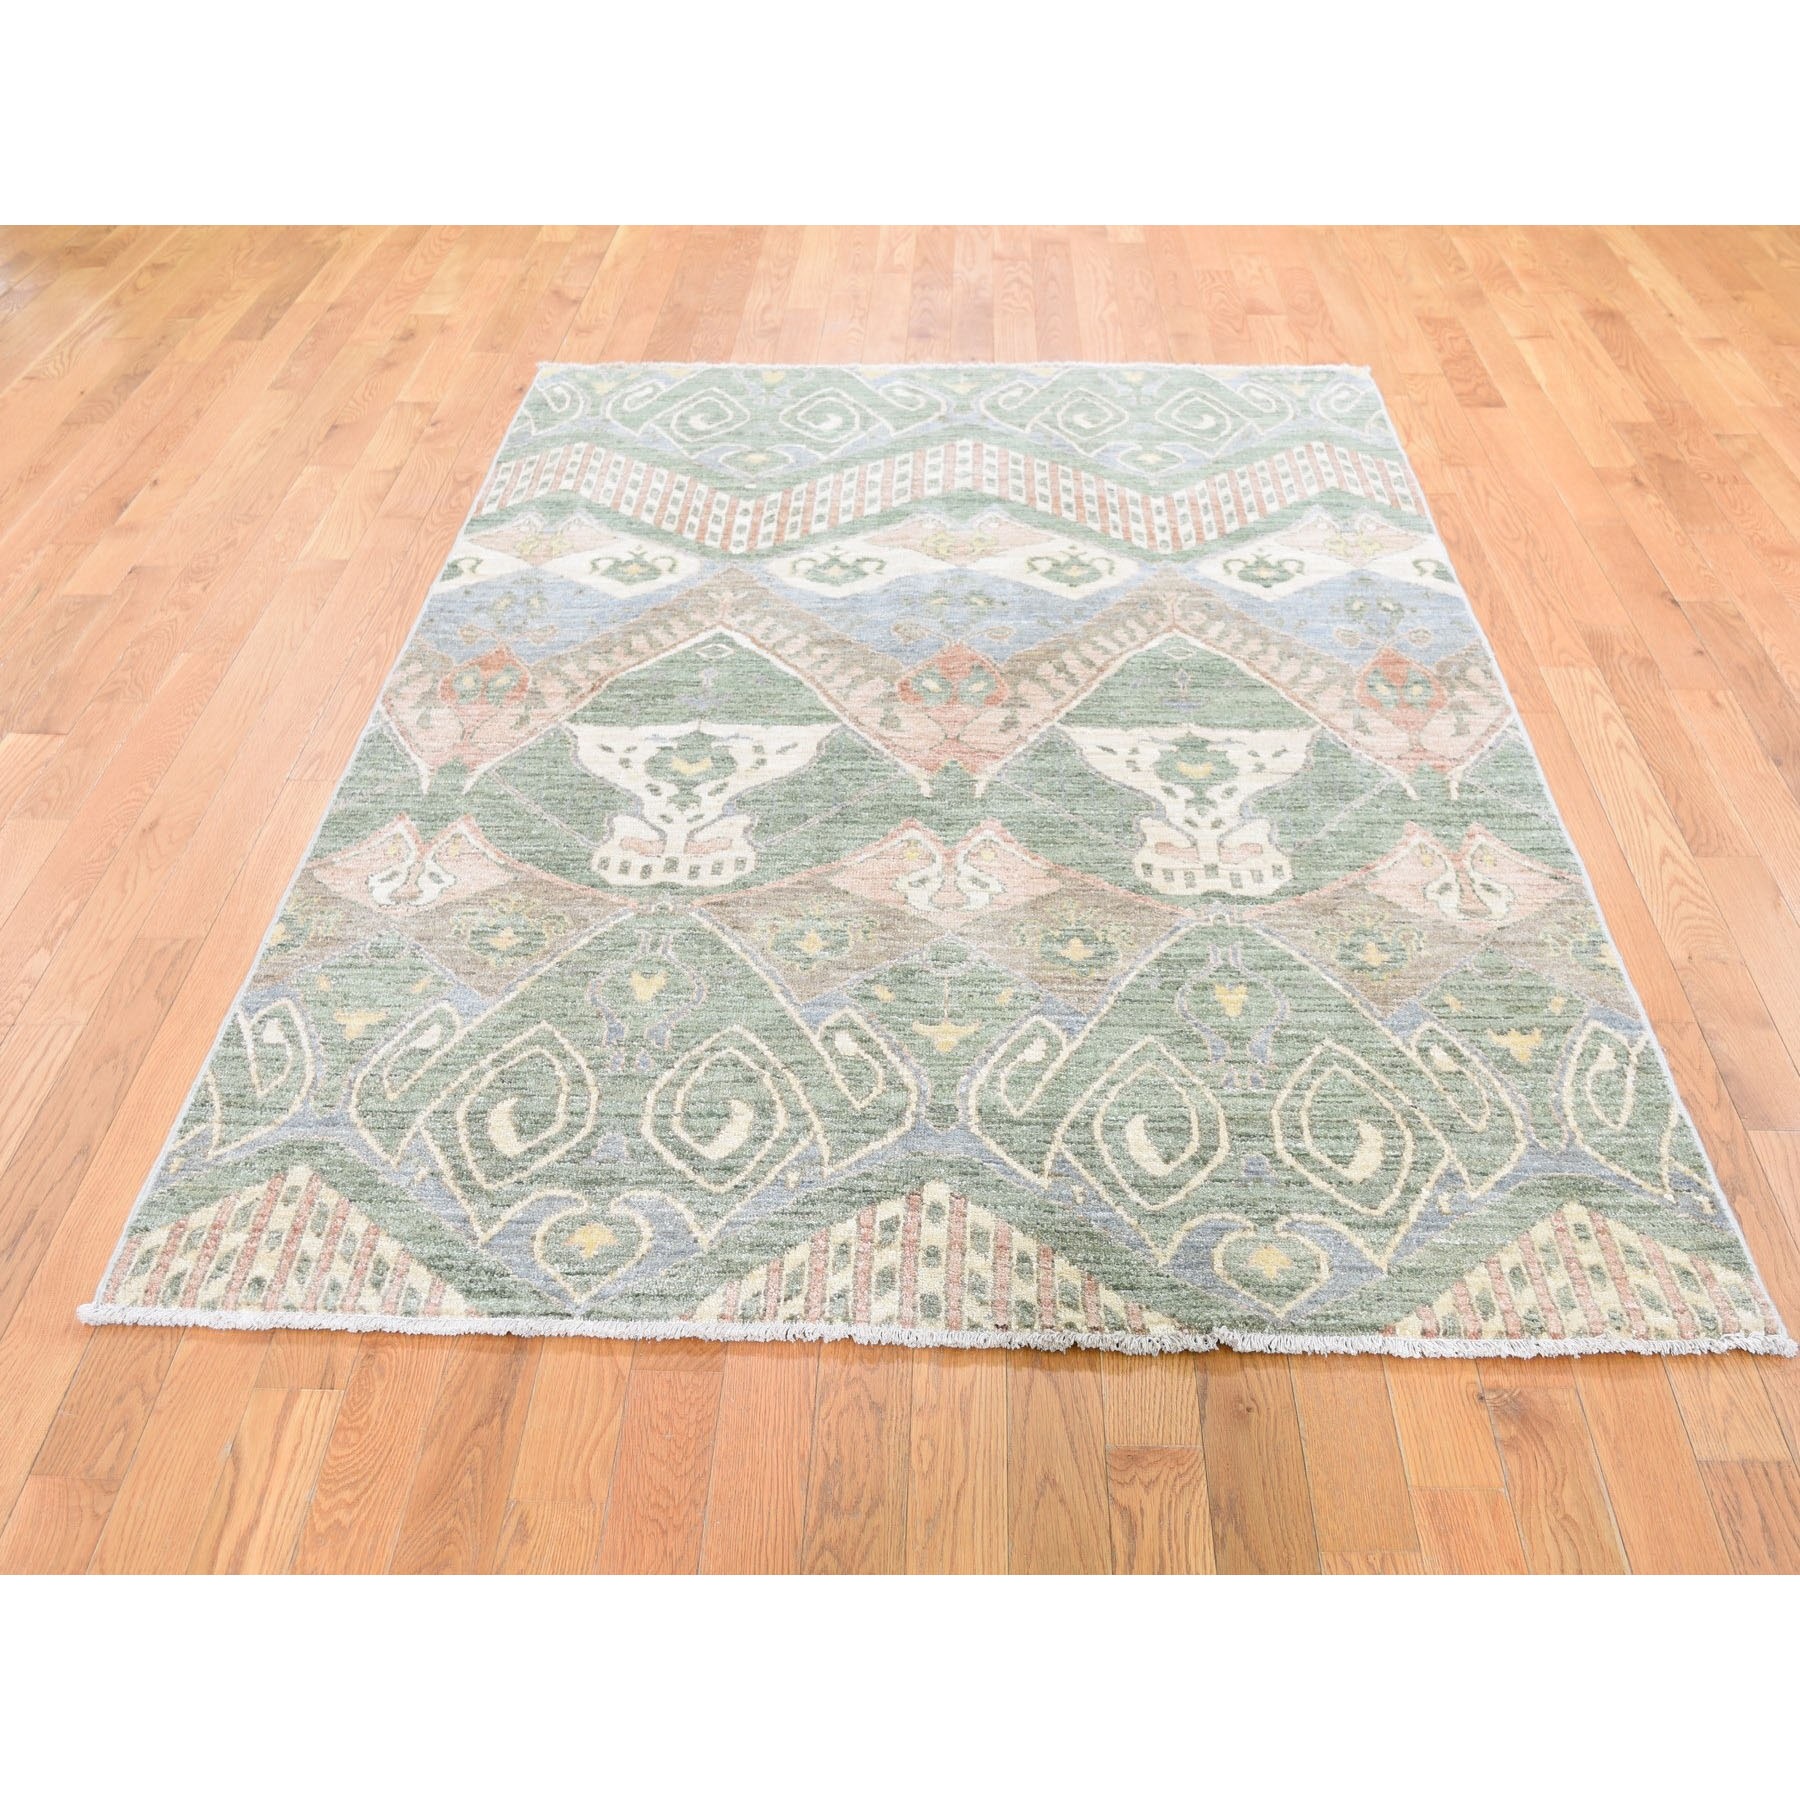  Wool Hand-Knotted Area Rug 5'1